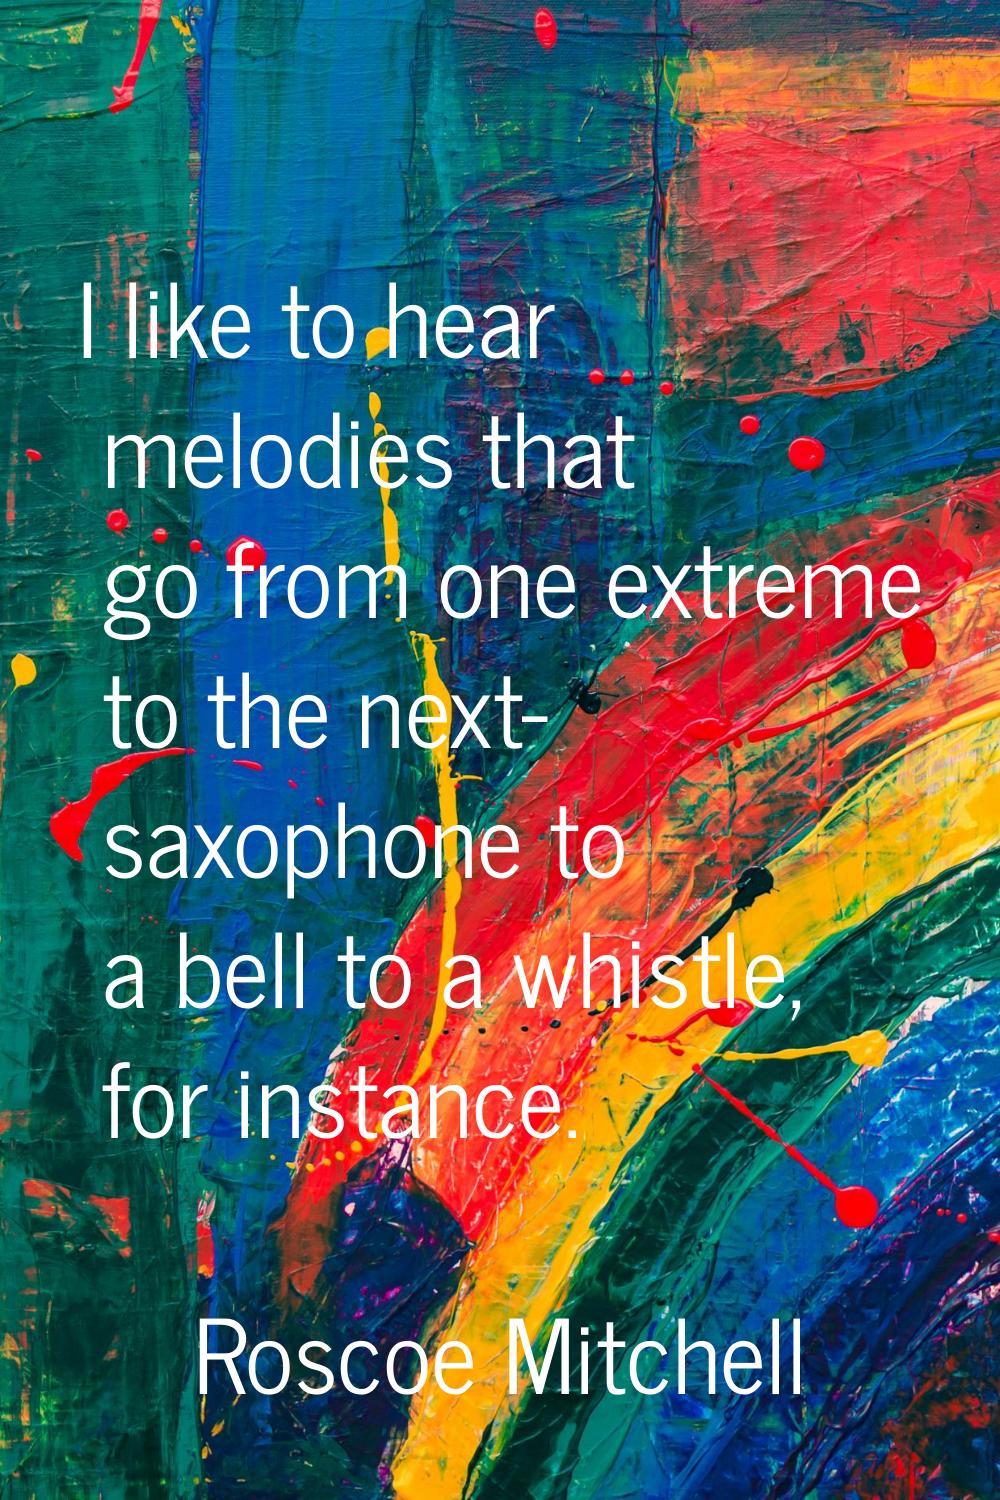 I like to hear melodies that go from one extreme to the next- saxophone to a bell to a whistle, for